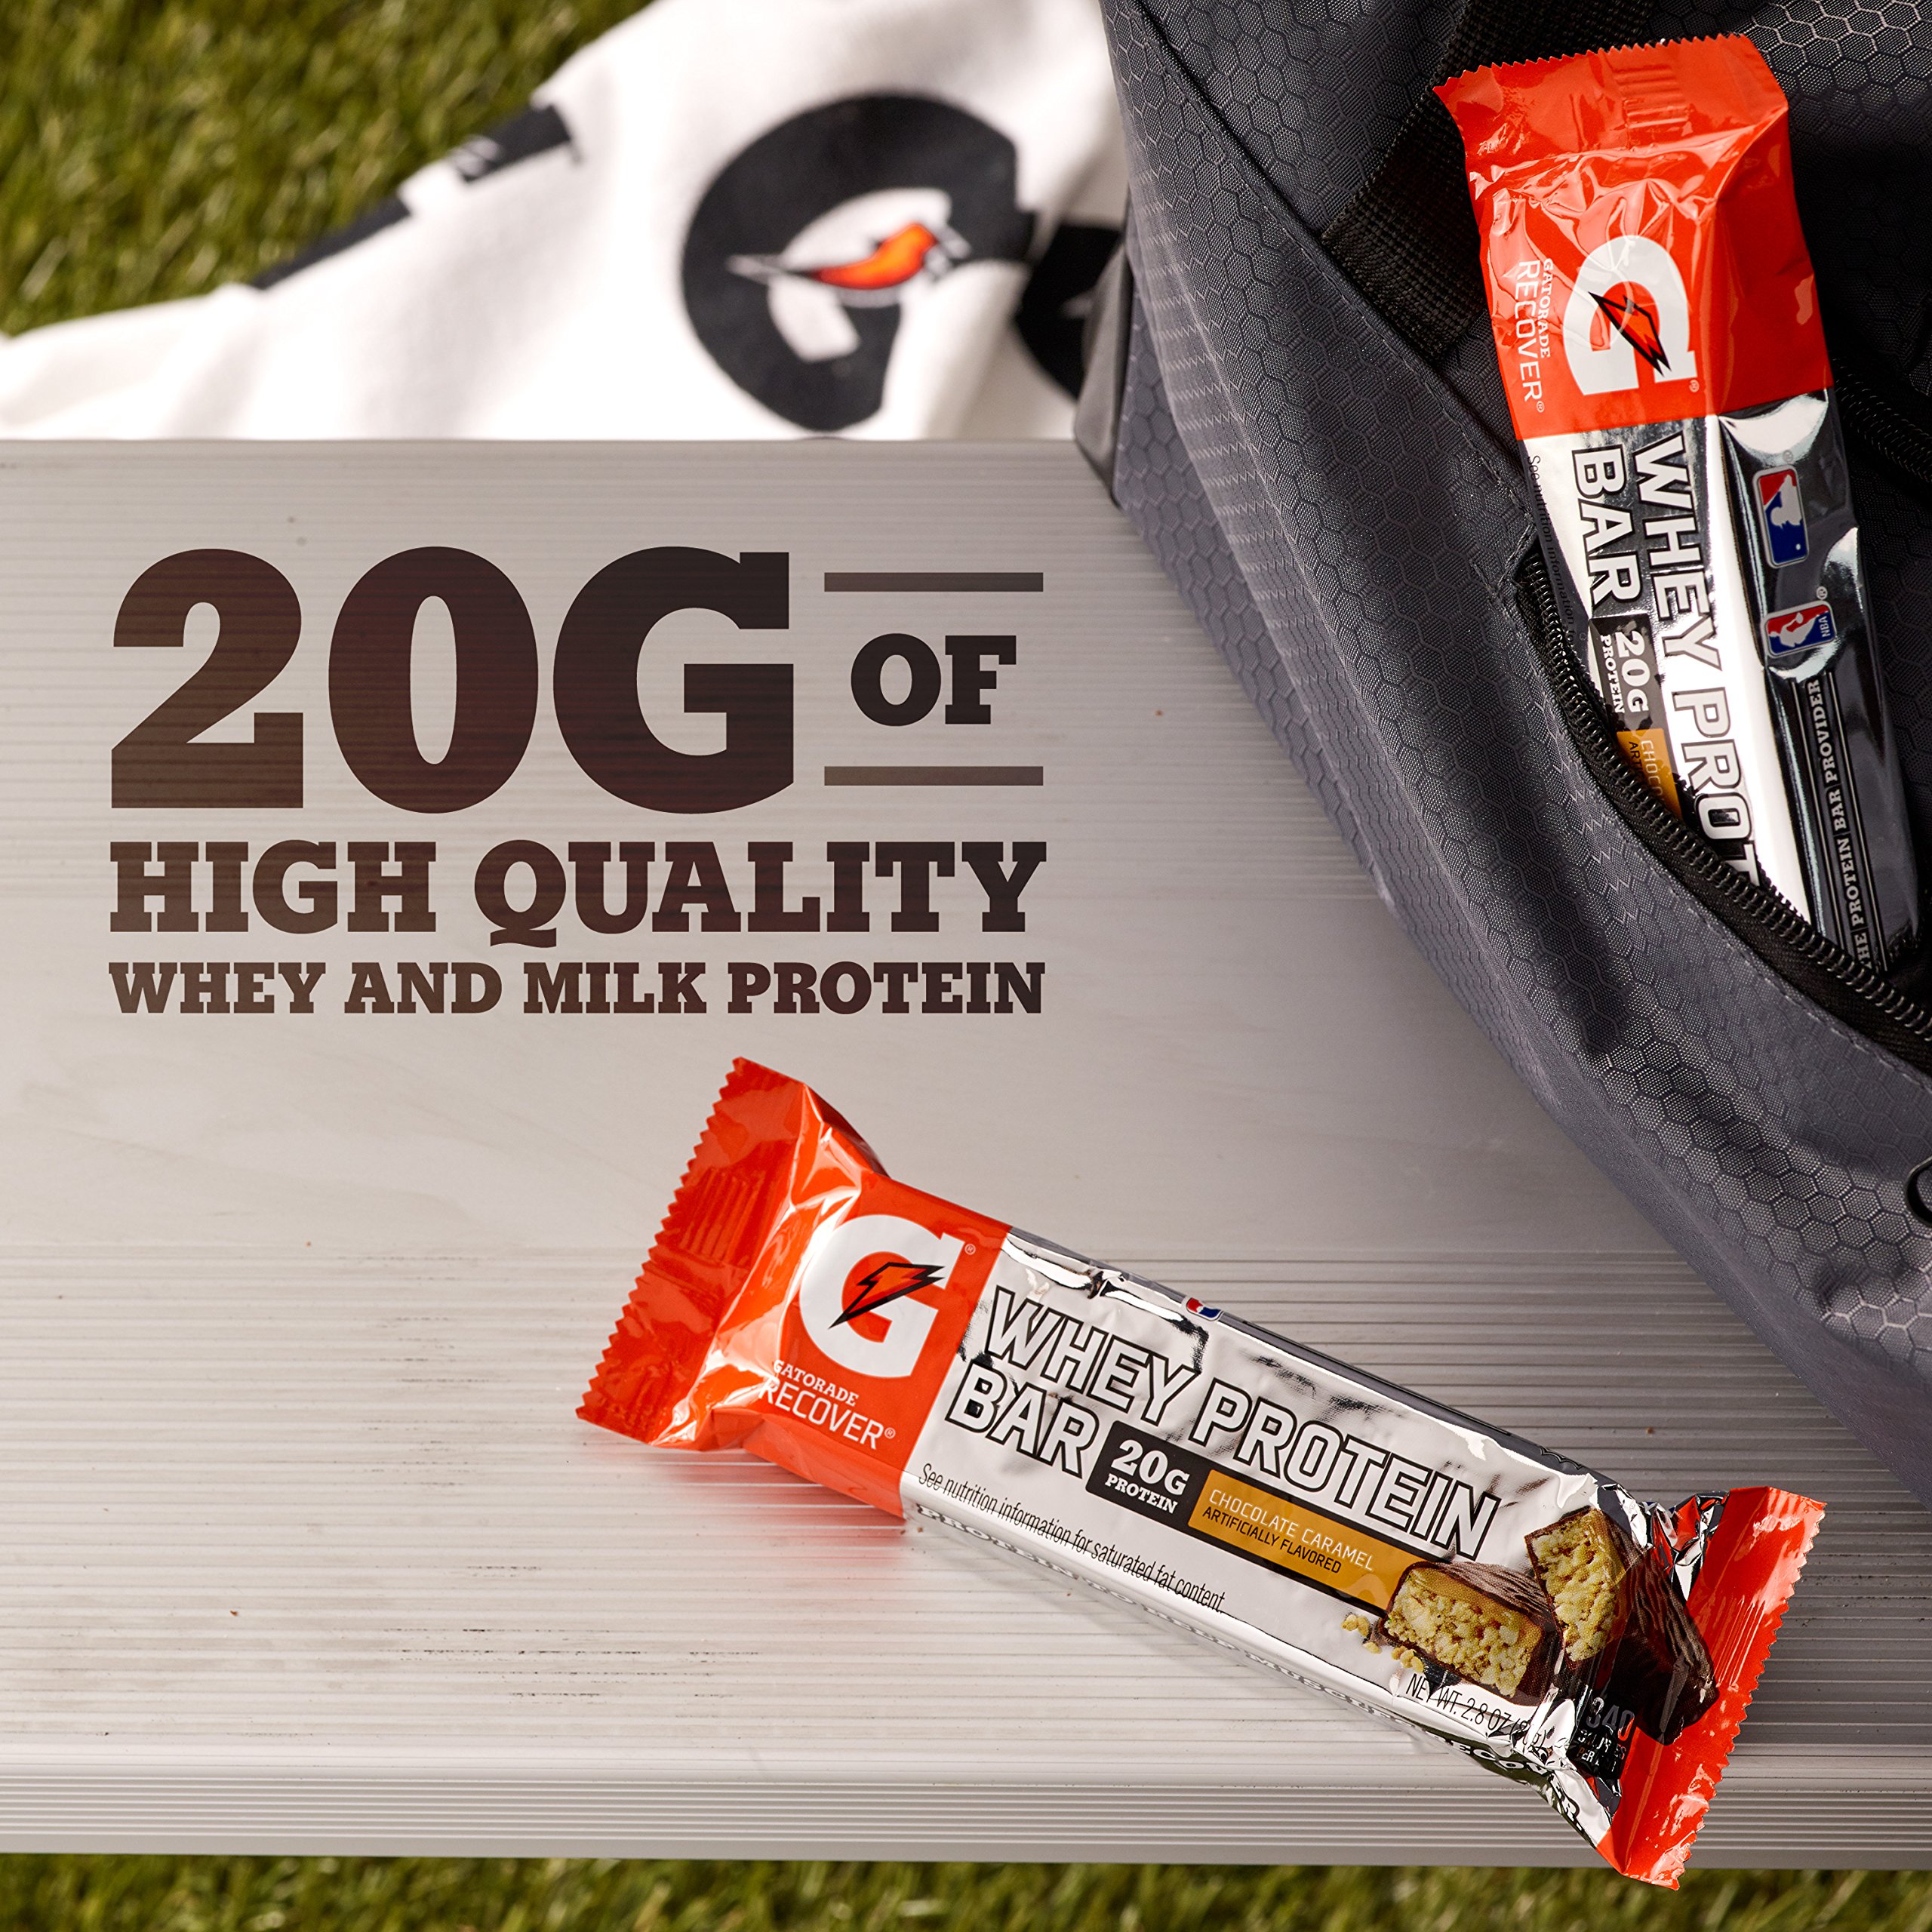 Gatorade Whey Protein Bars, Variety Pack, 2.8 oz bars (Pack of 18) & Whey Protein Bars, Cookies & Crème, 2.8 oz bars (Pack of 12, 20g of protein per bar)